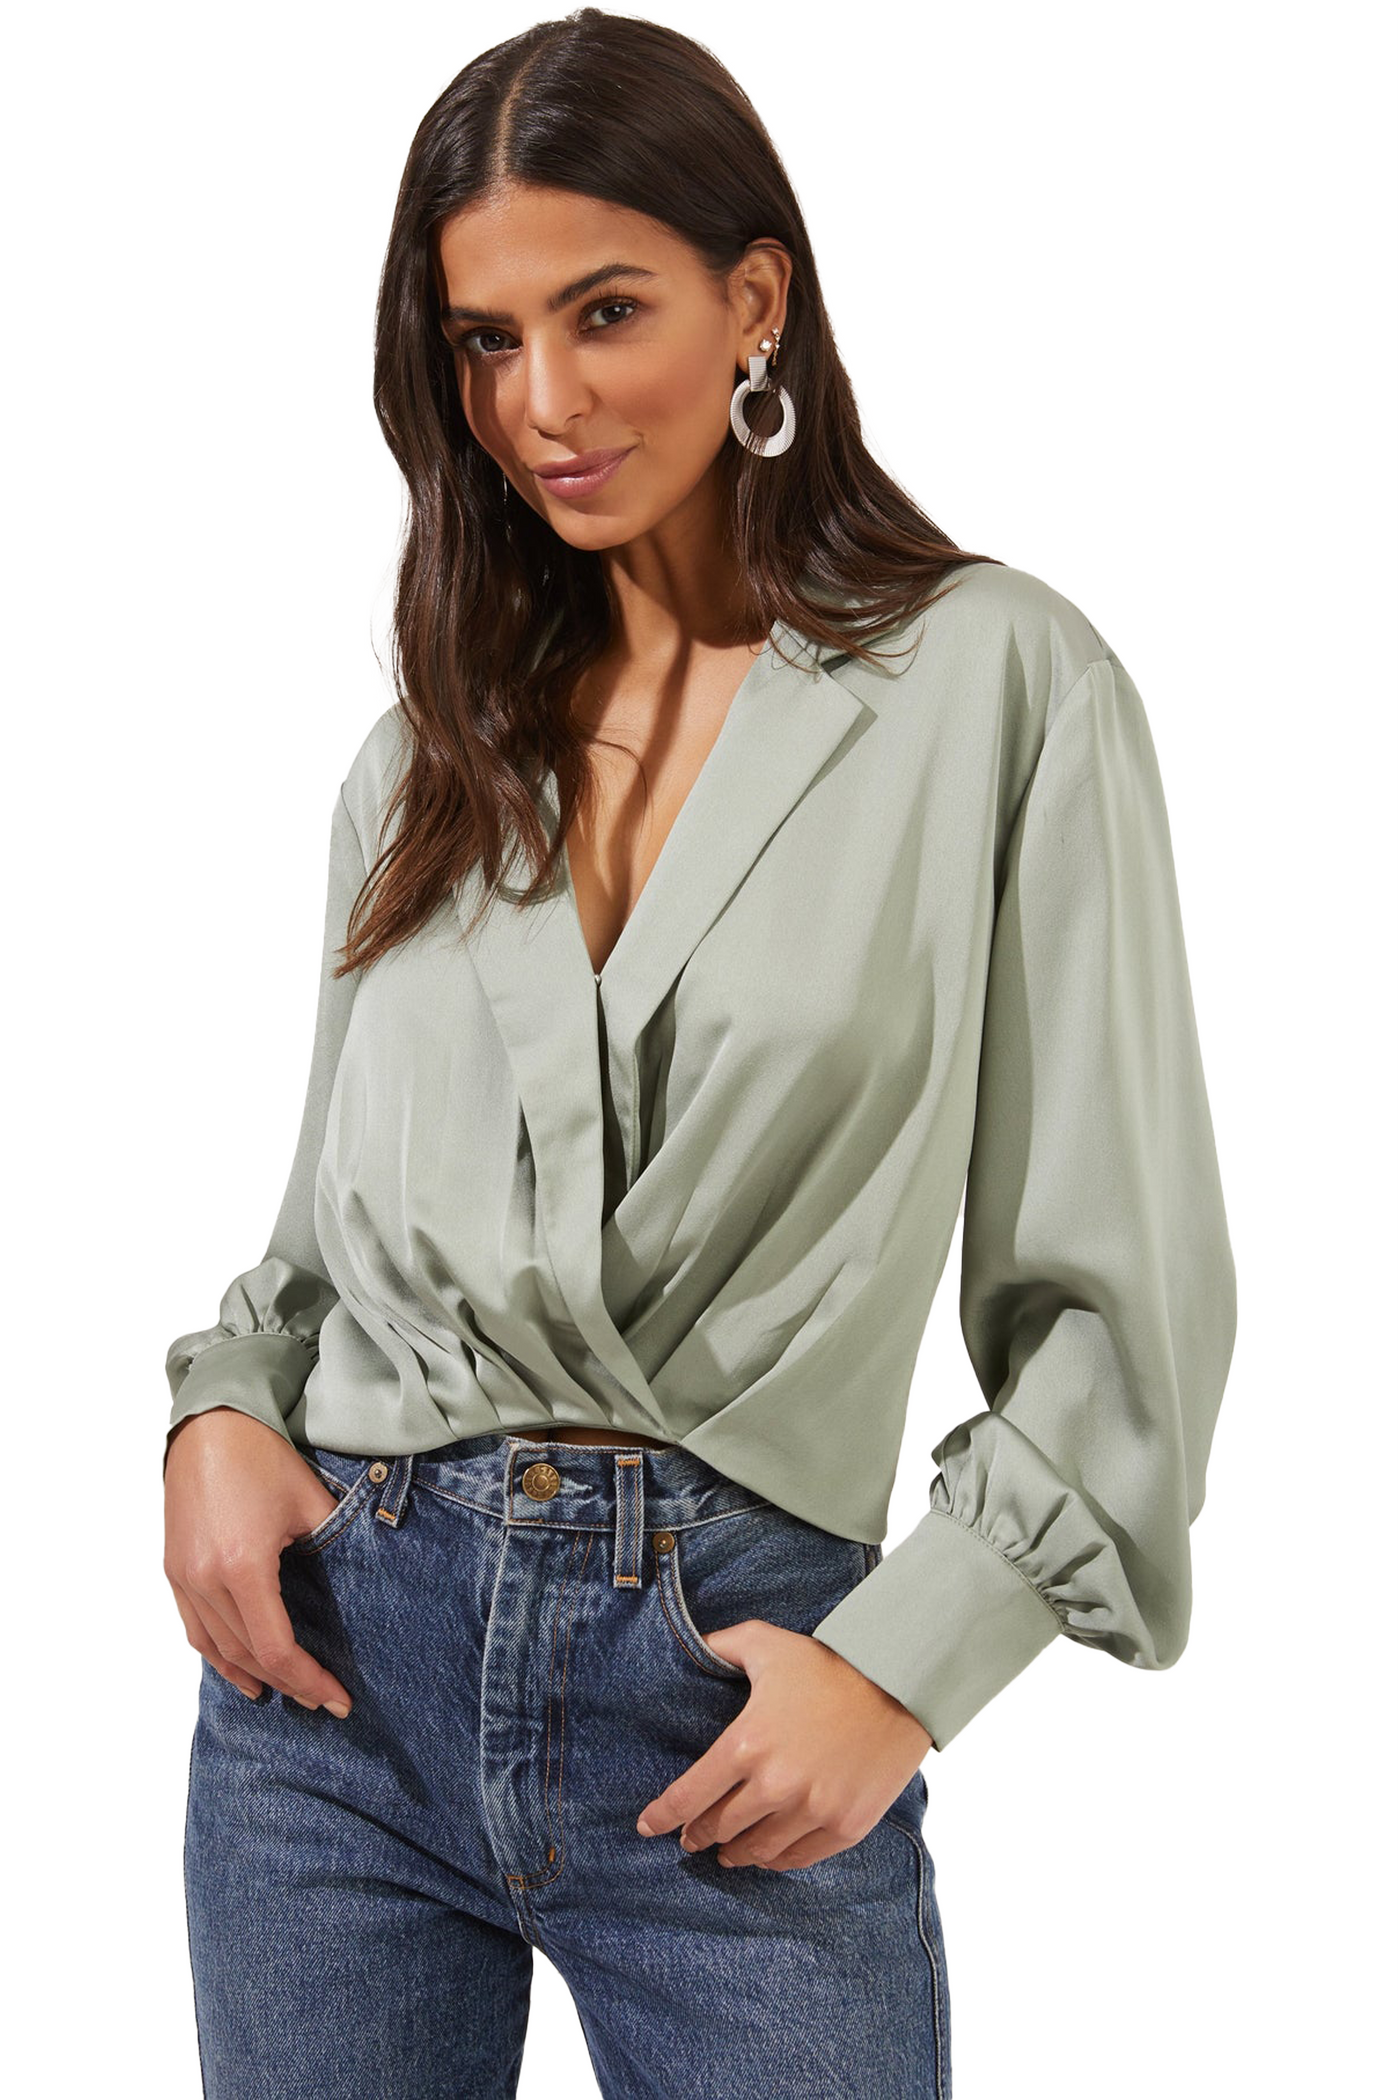 astr the label: marinetta satin surplice long sleeve top with buttoned cuffs